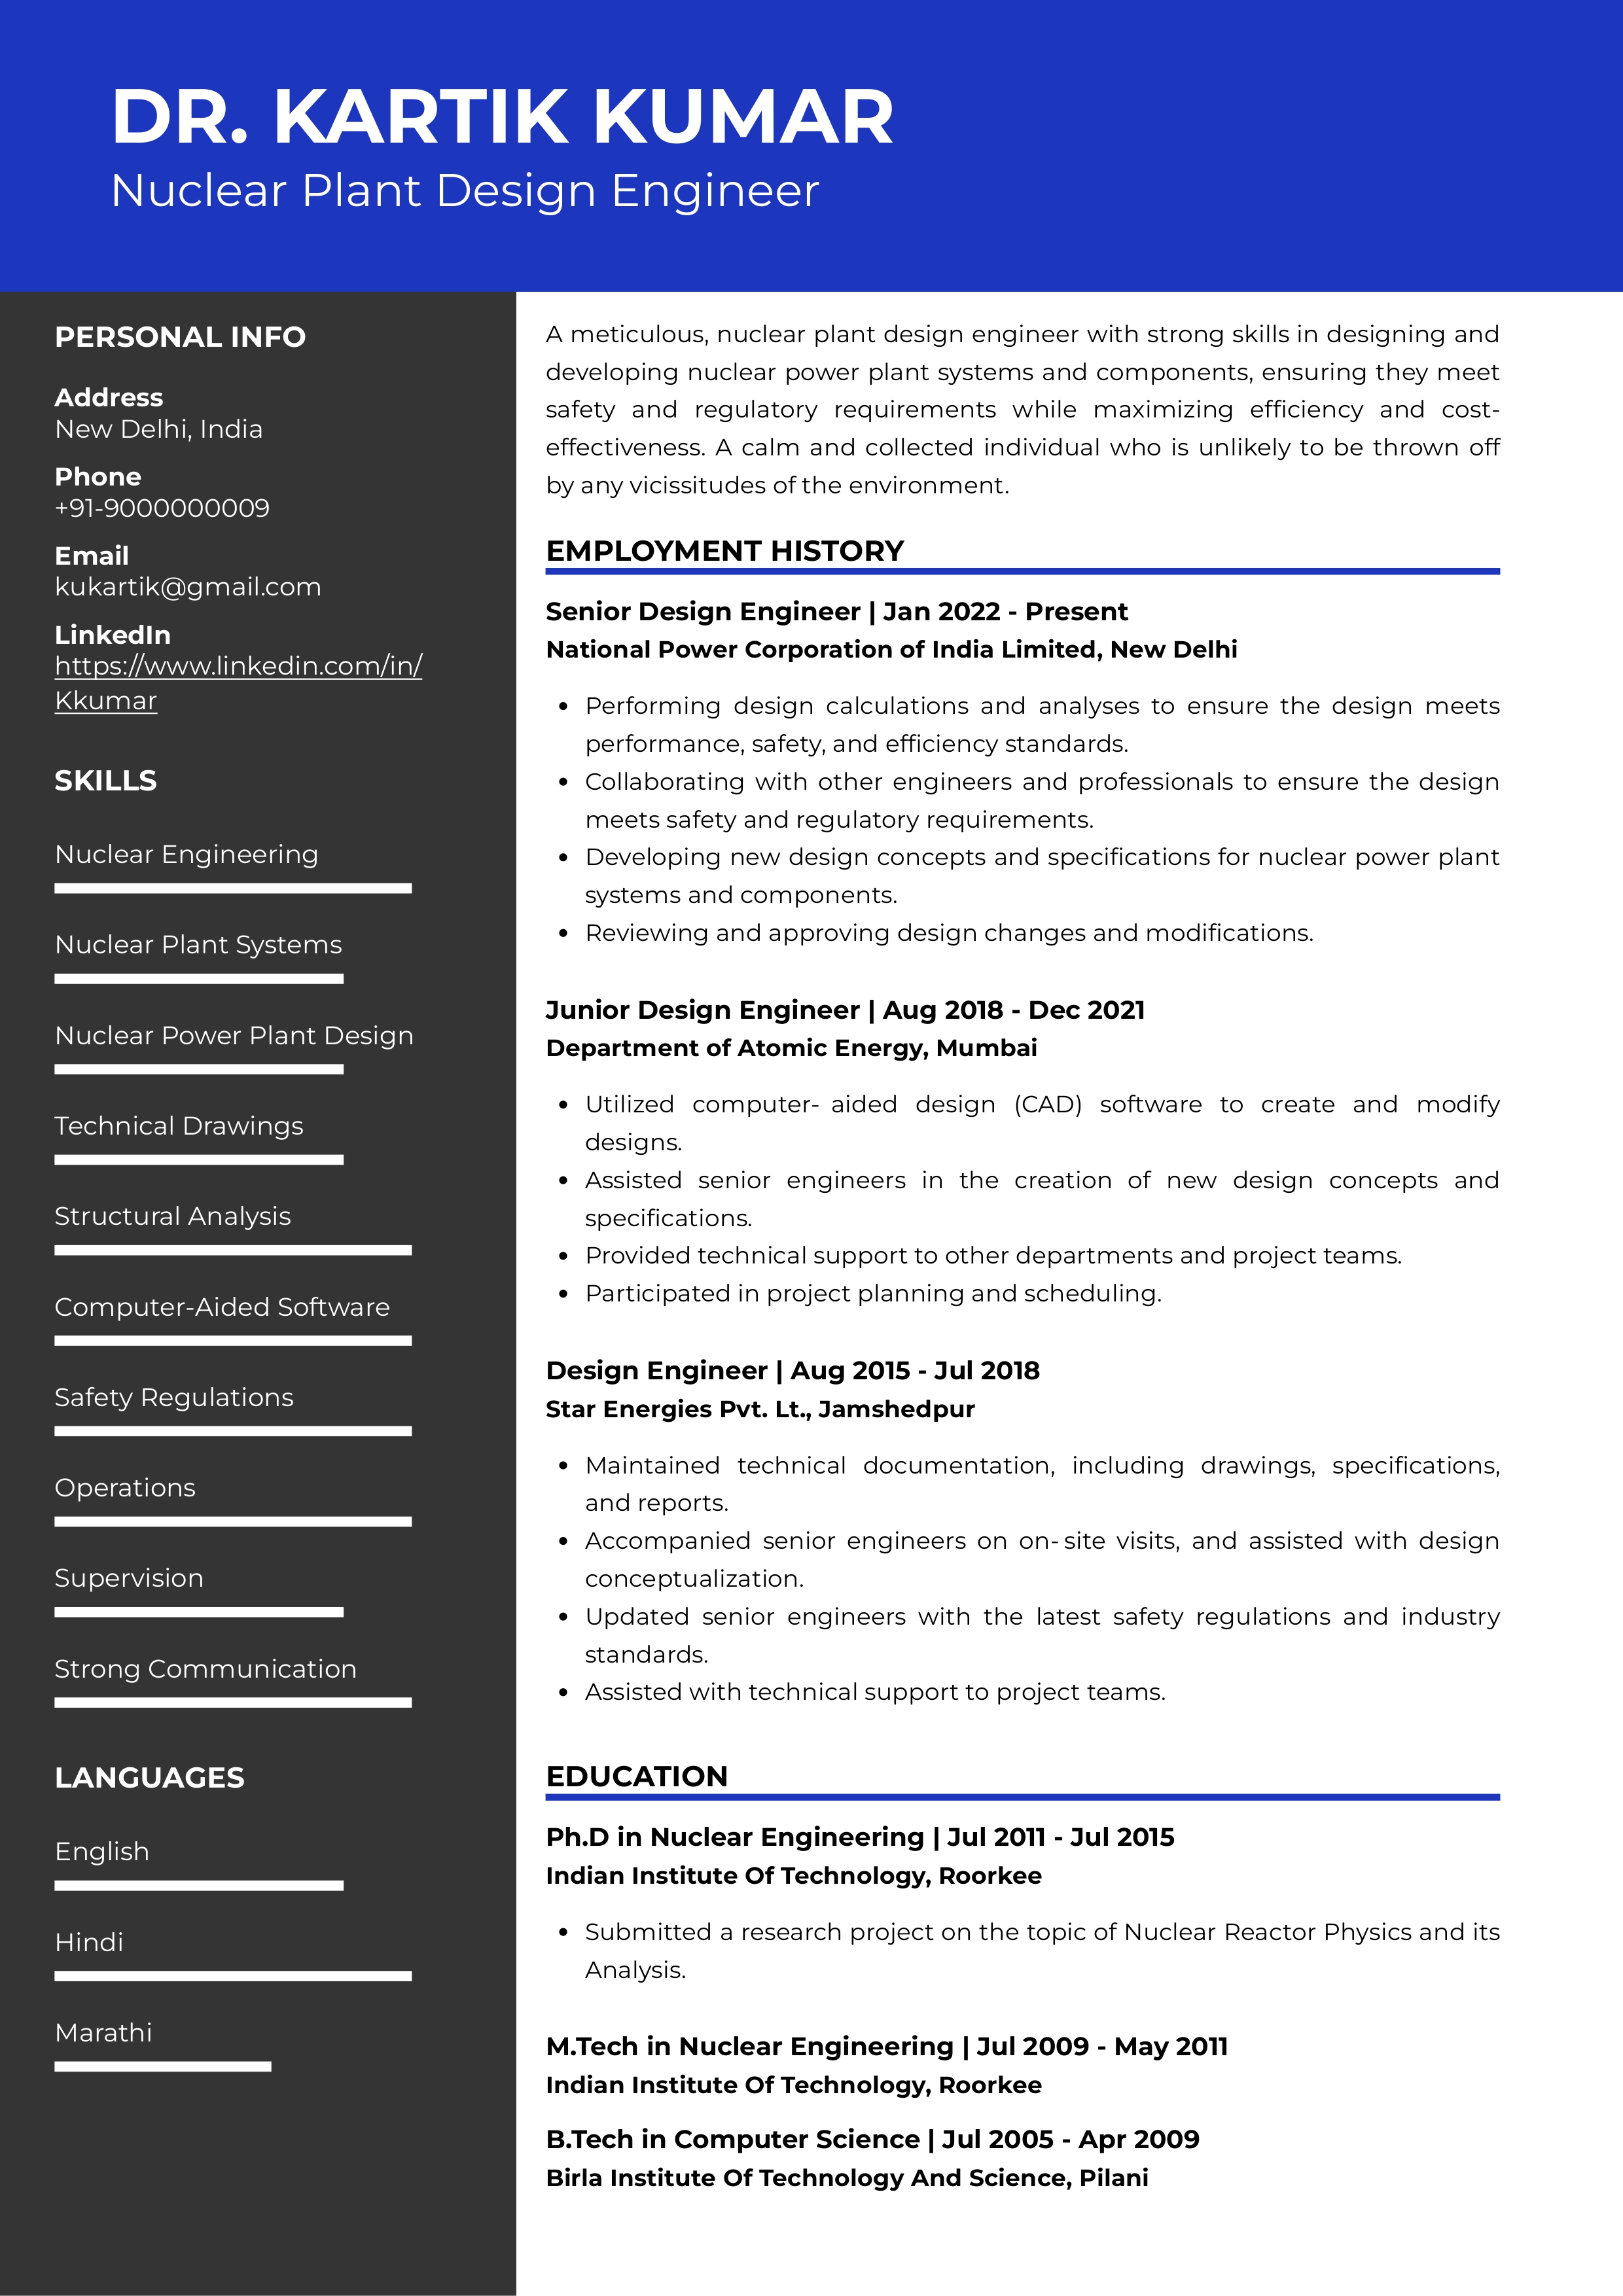 Sample Resume of Nuclear Plant Design Engineer | Free Resume Templates & Samples on Resumod.co